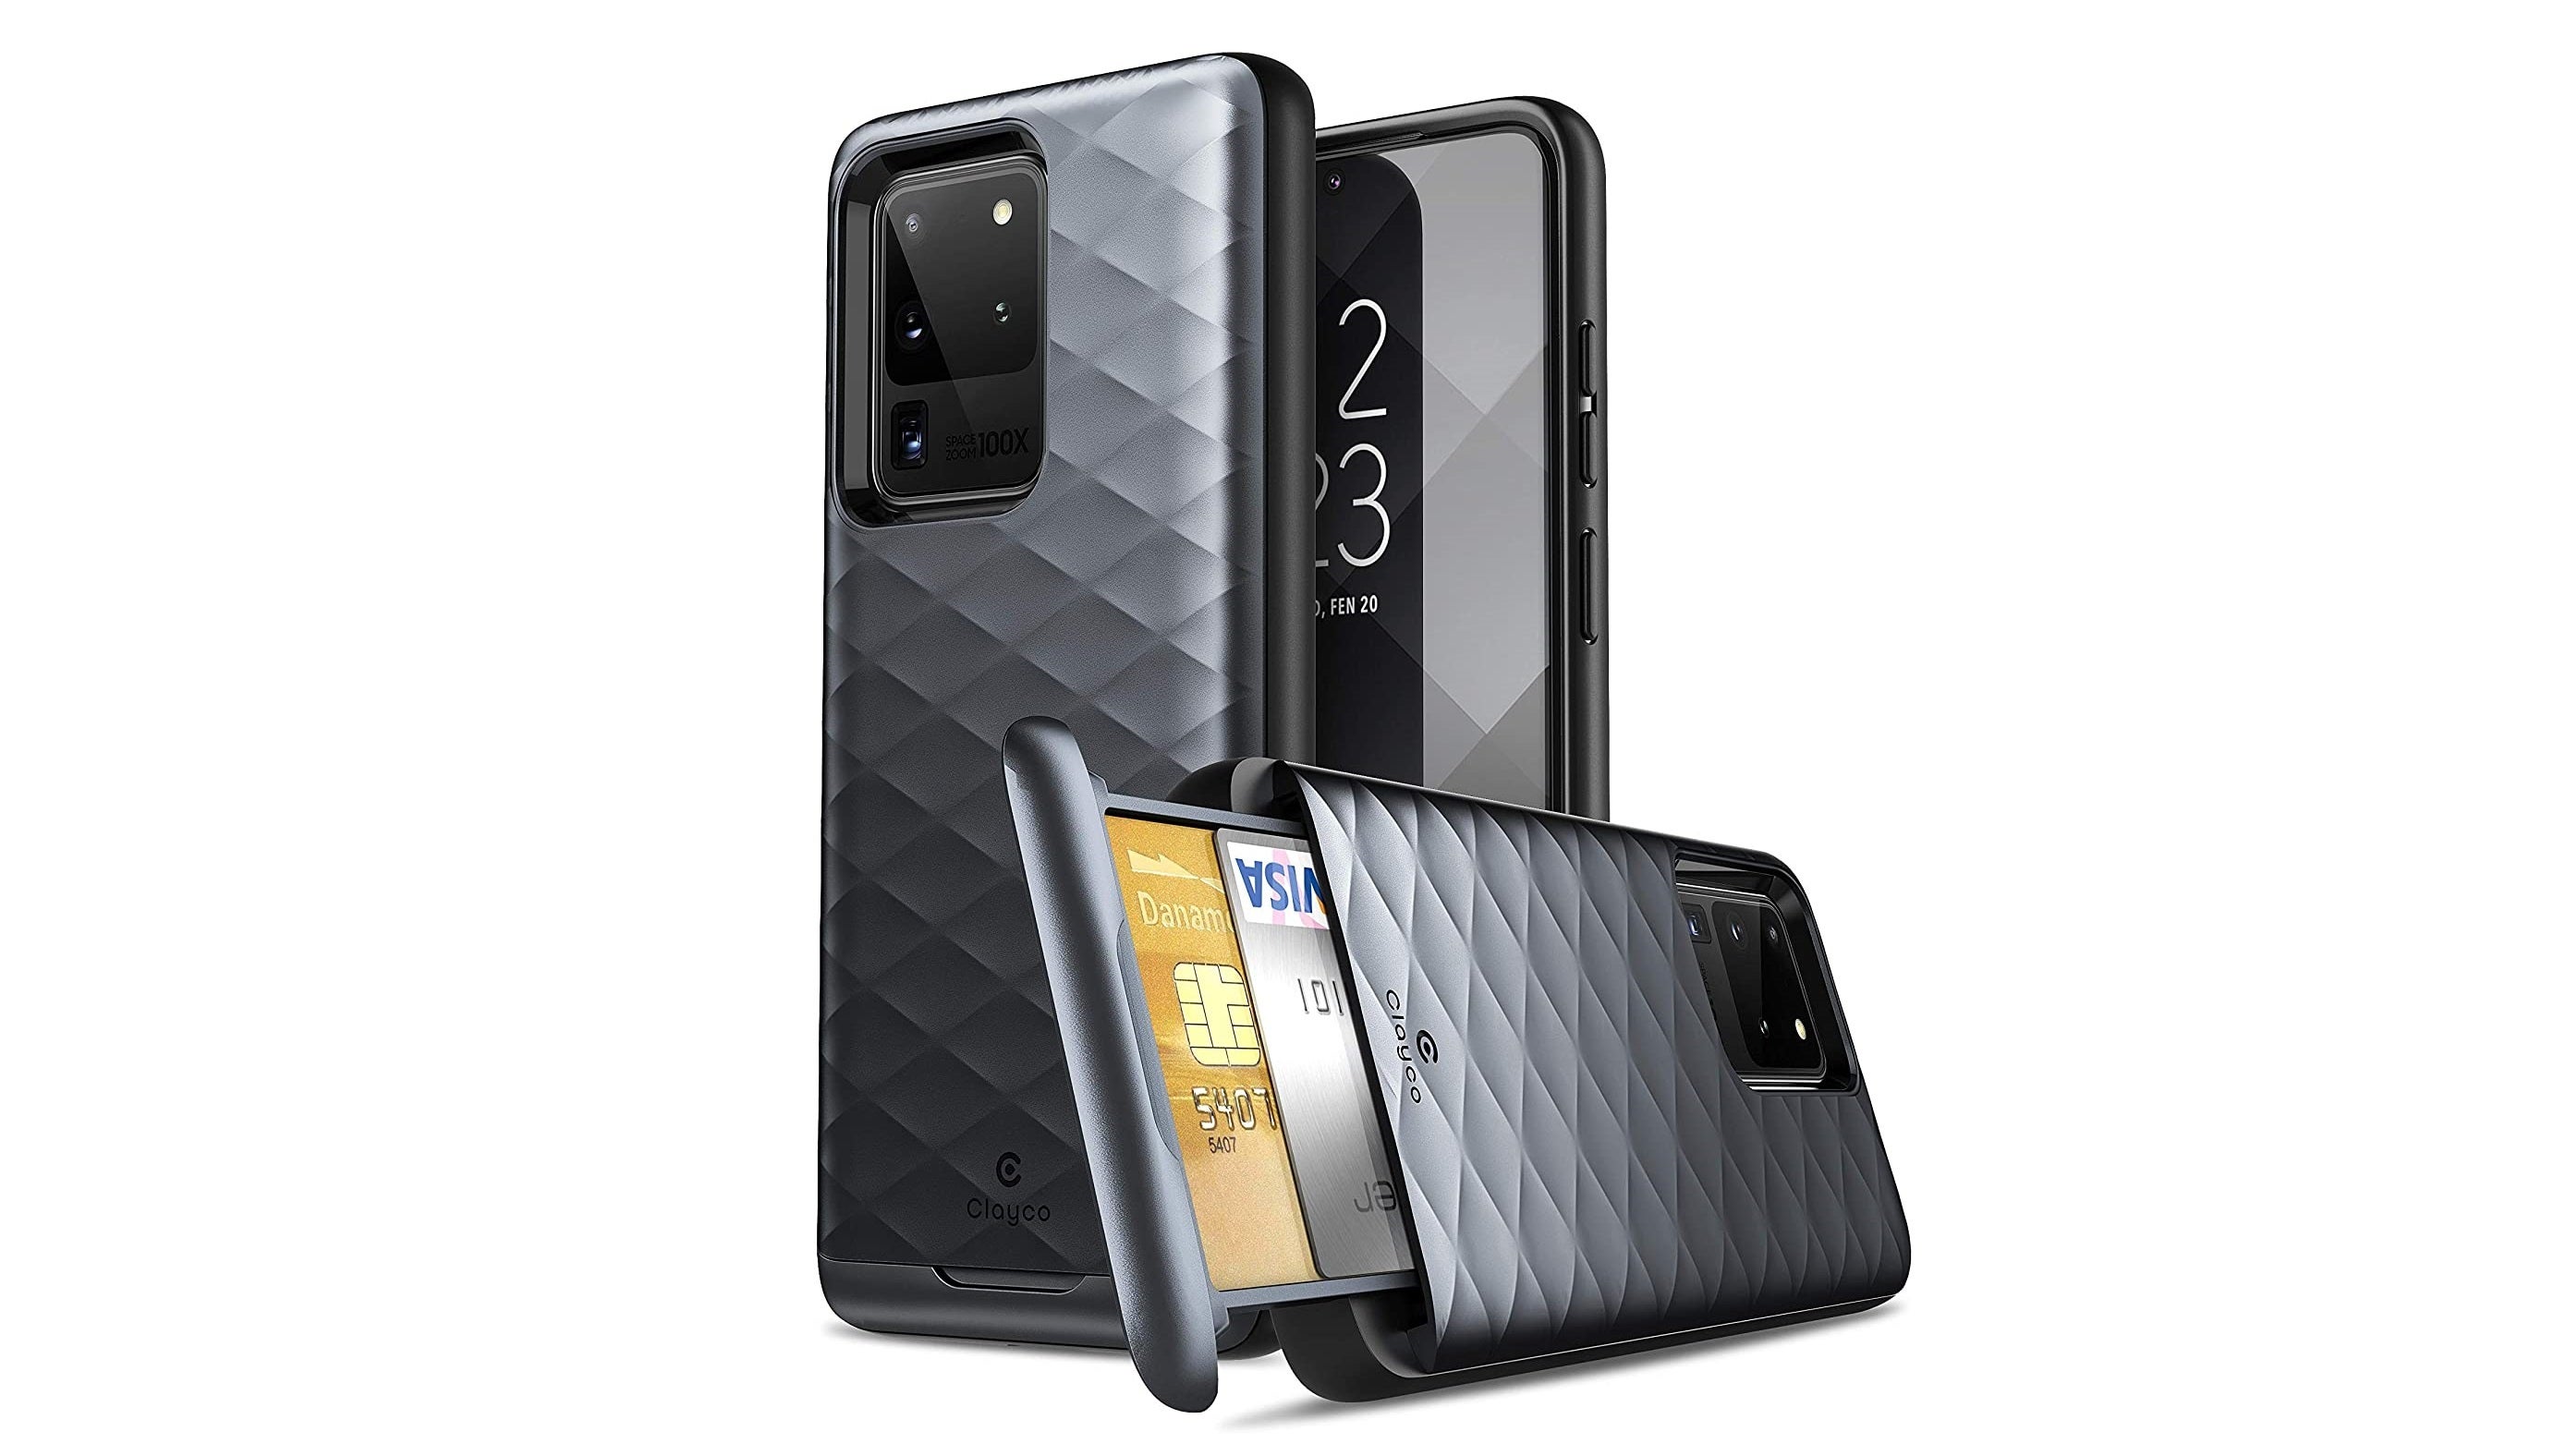 The best Samsung Galaxy S20 Ultra cases